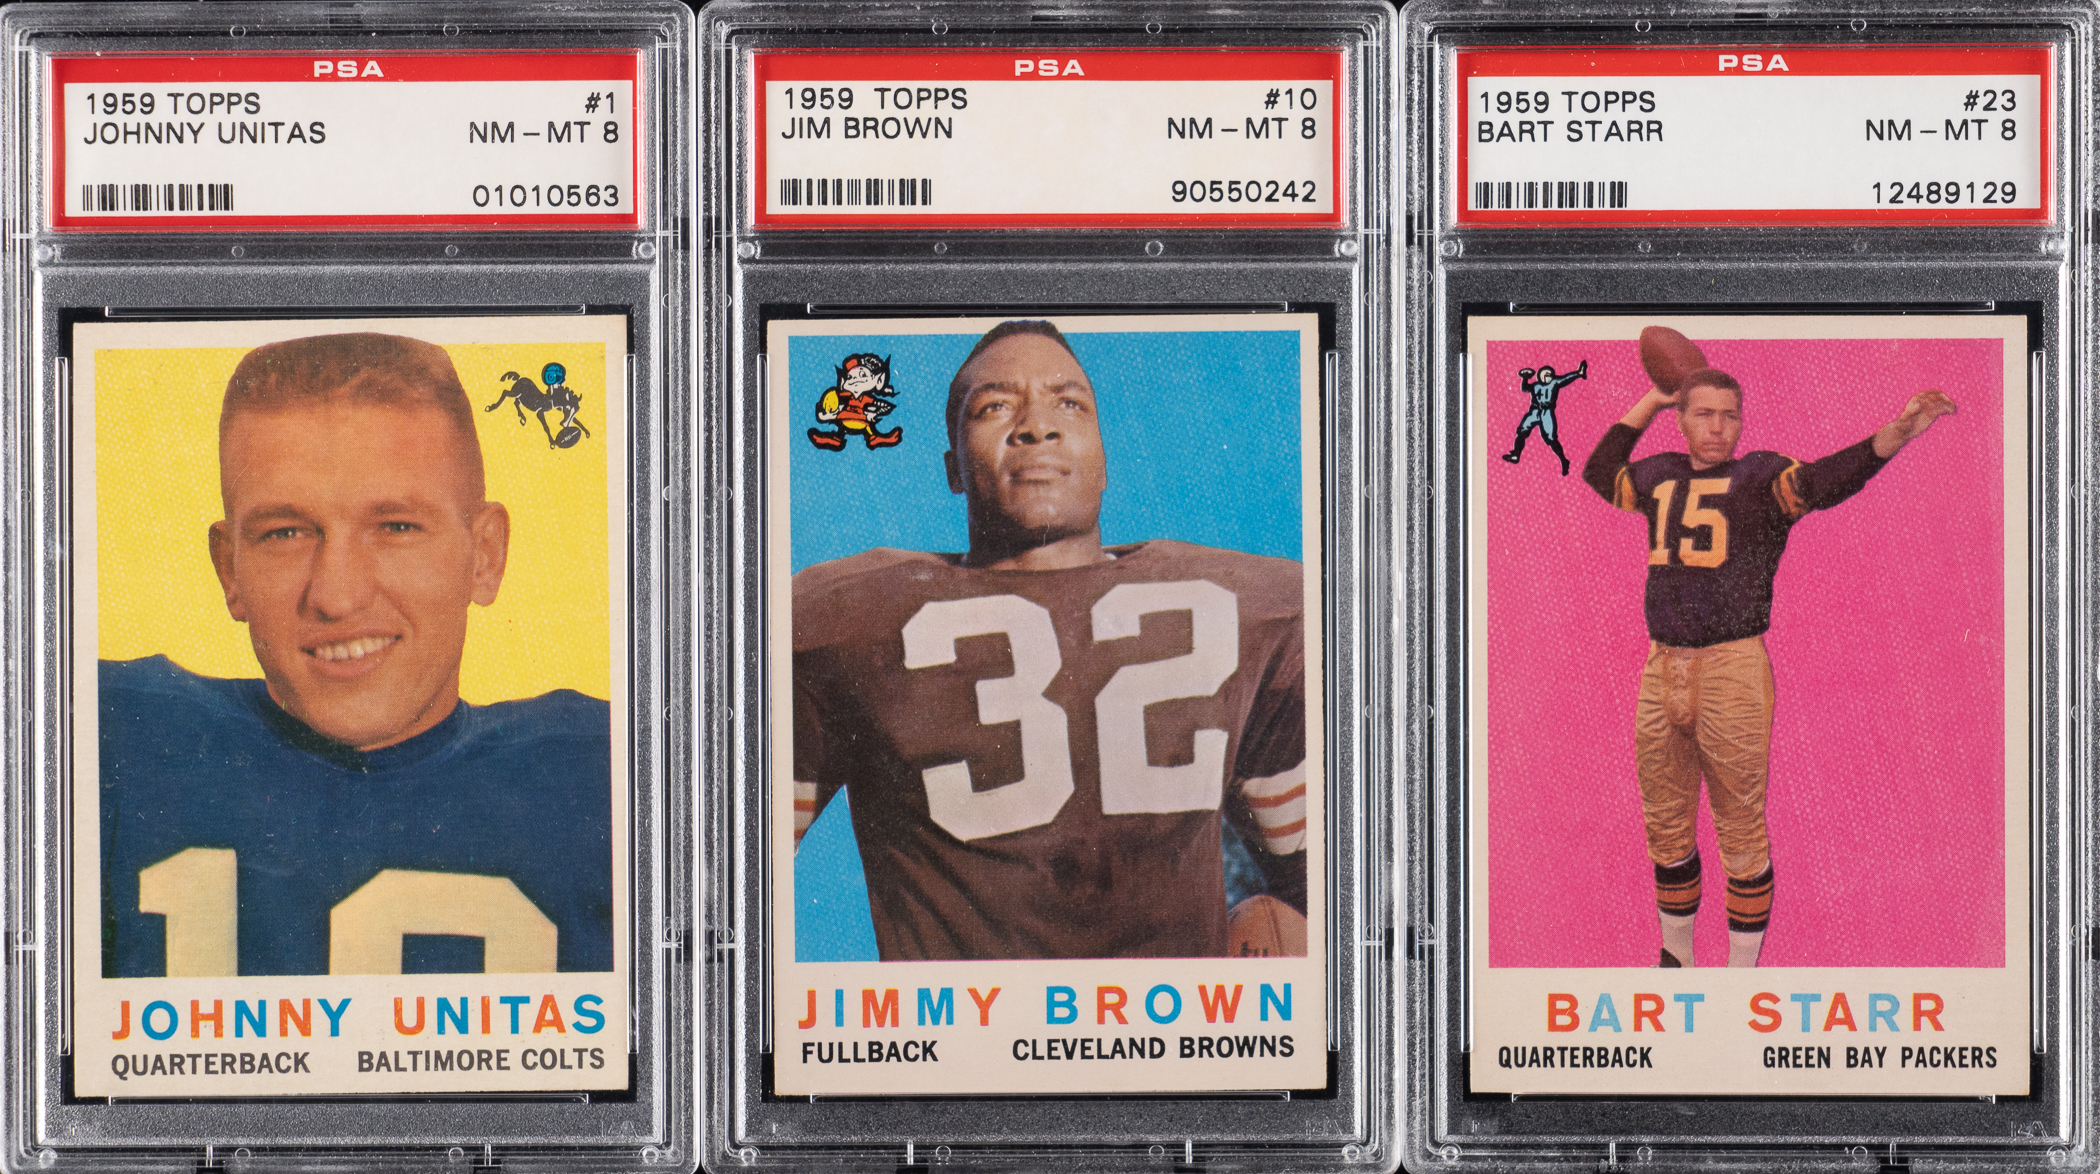 Robert's collection included several complete sets, including this 1959 Topps Football full set that's been graded NM-MT 8 by PSA and SGC